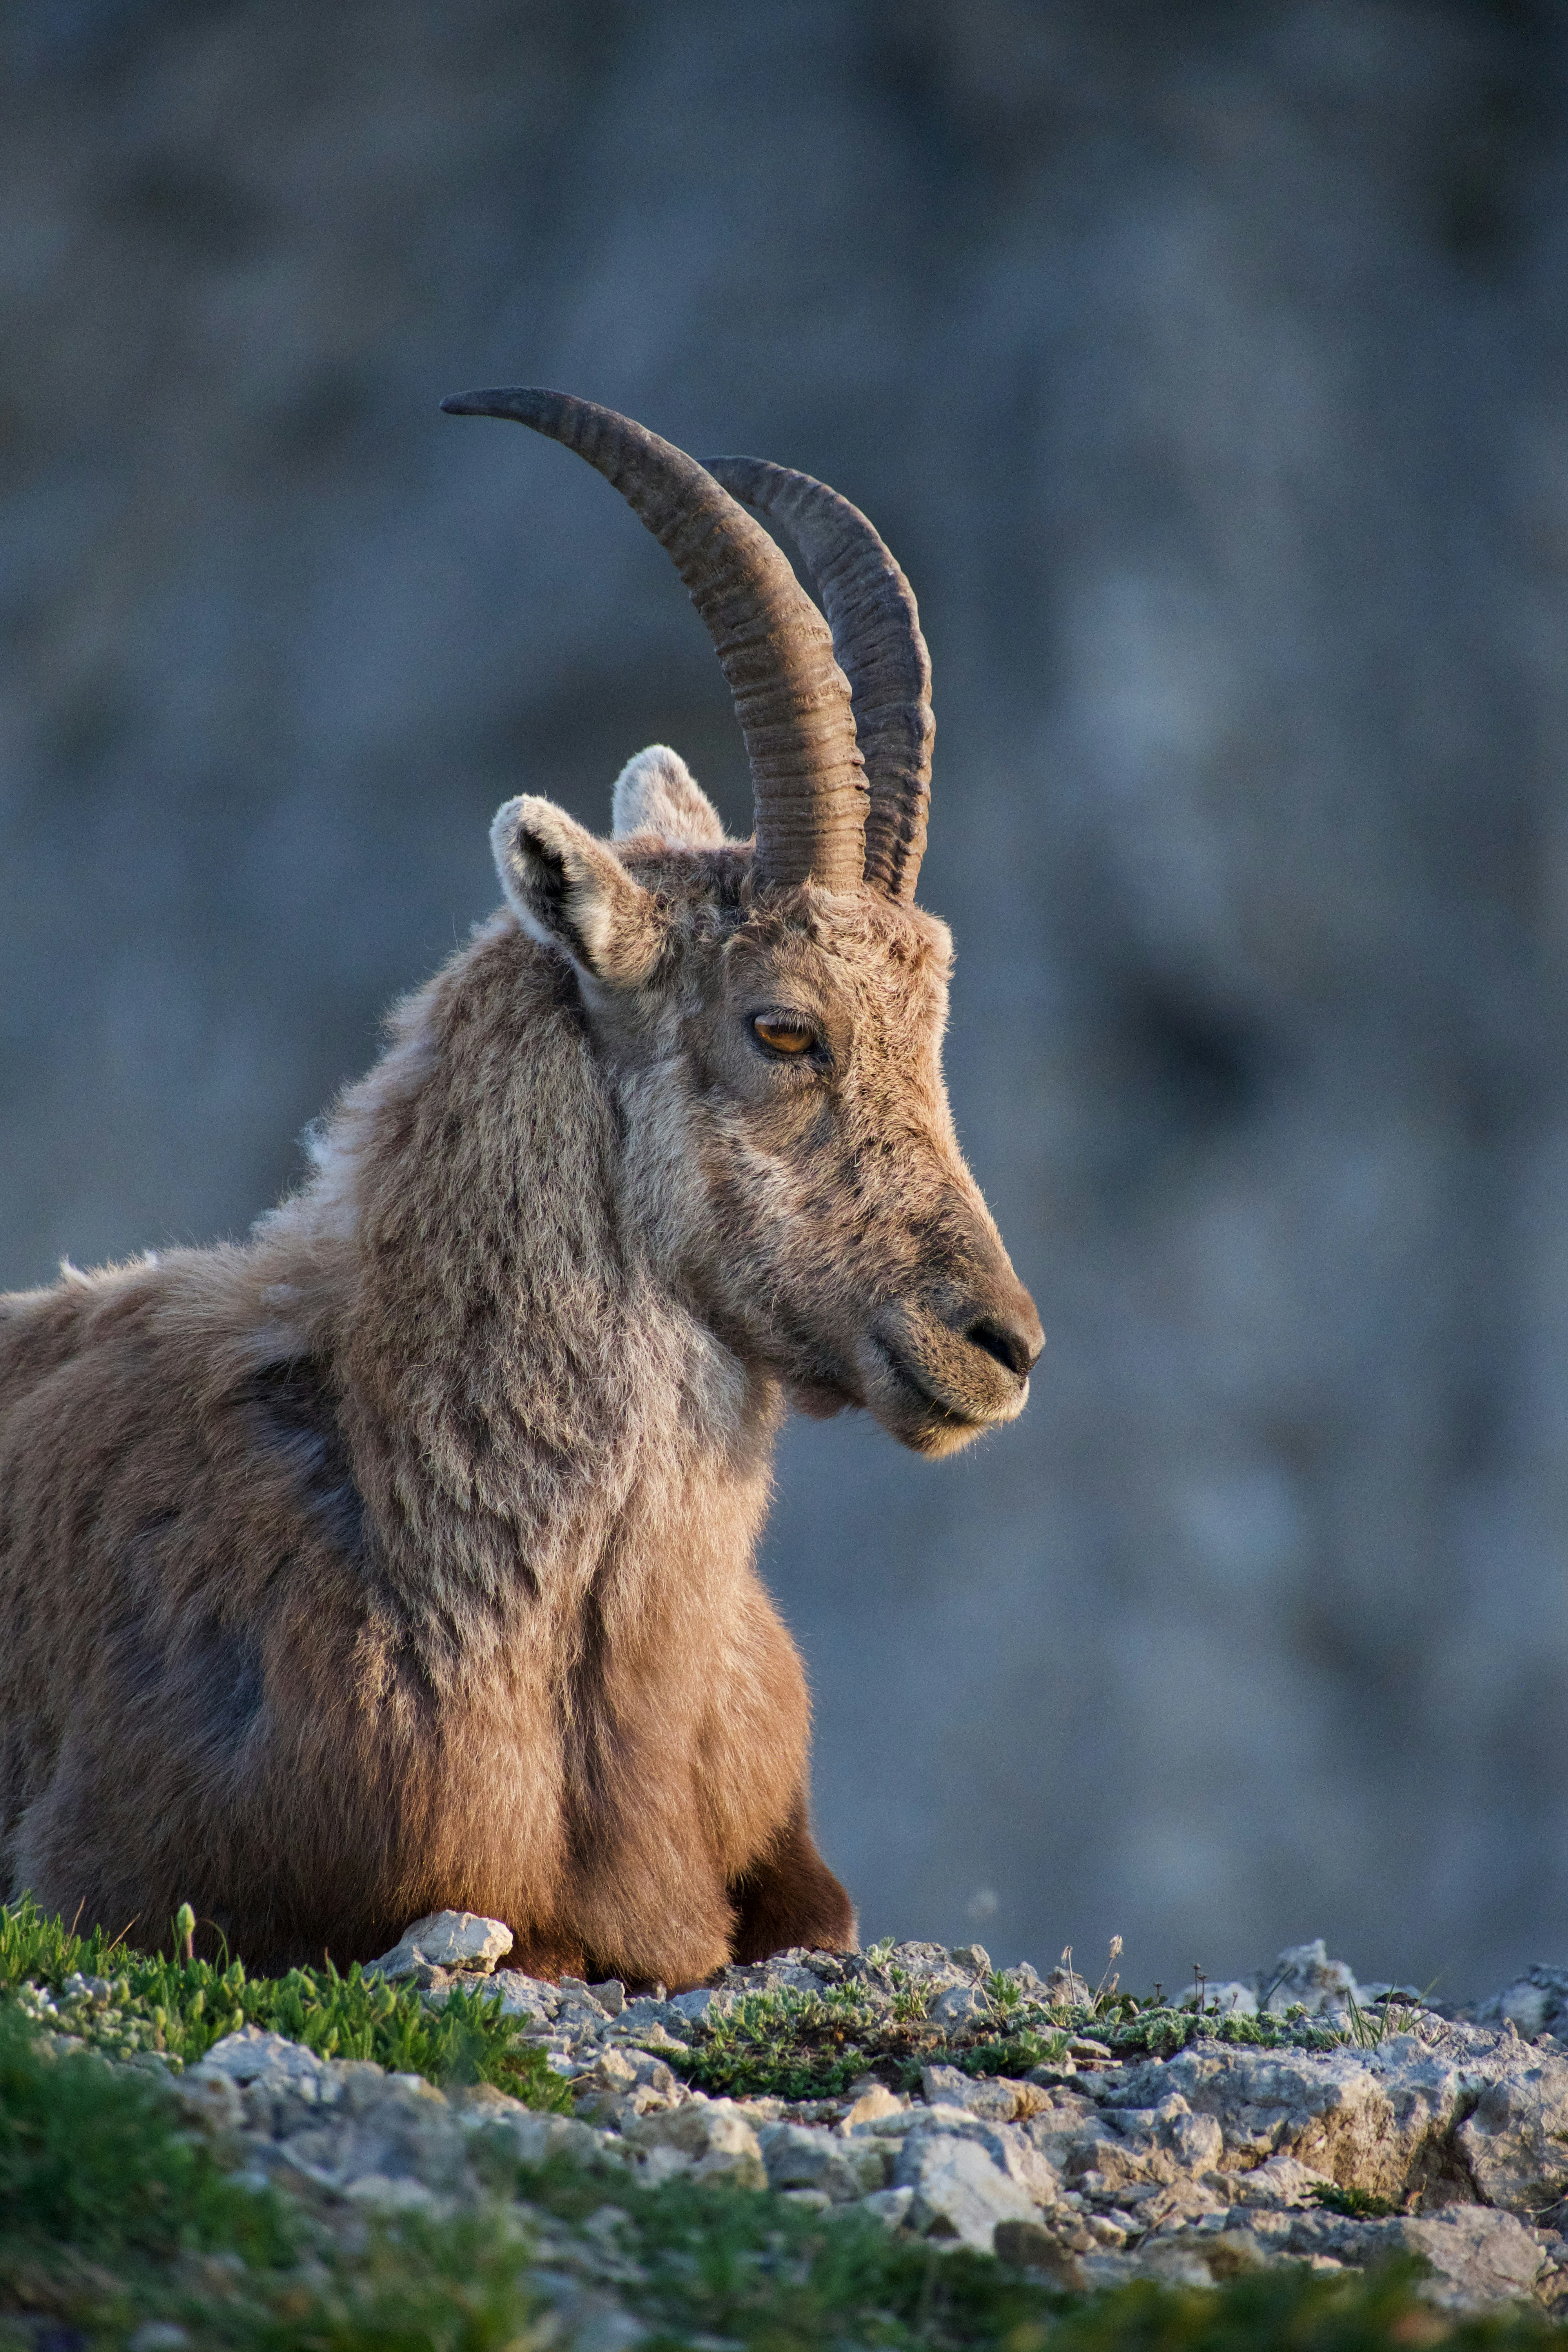 Close-up of a young ibex against a rocky background.